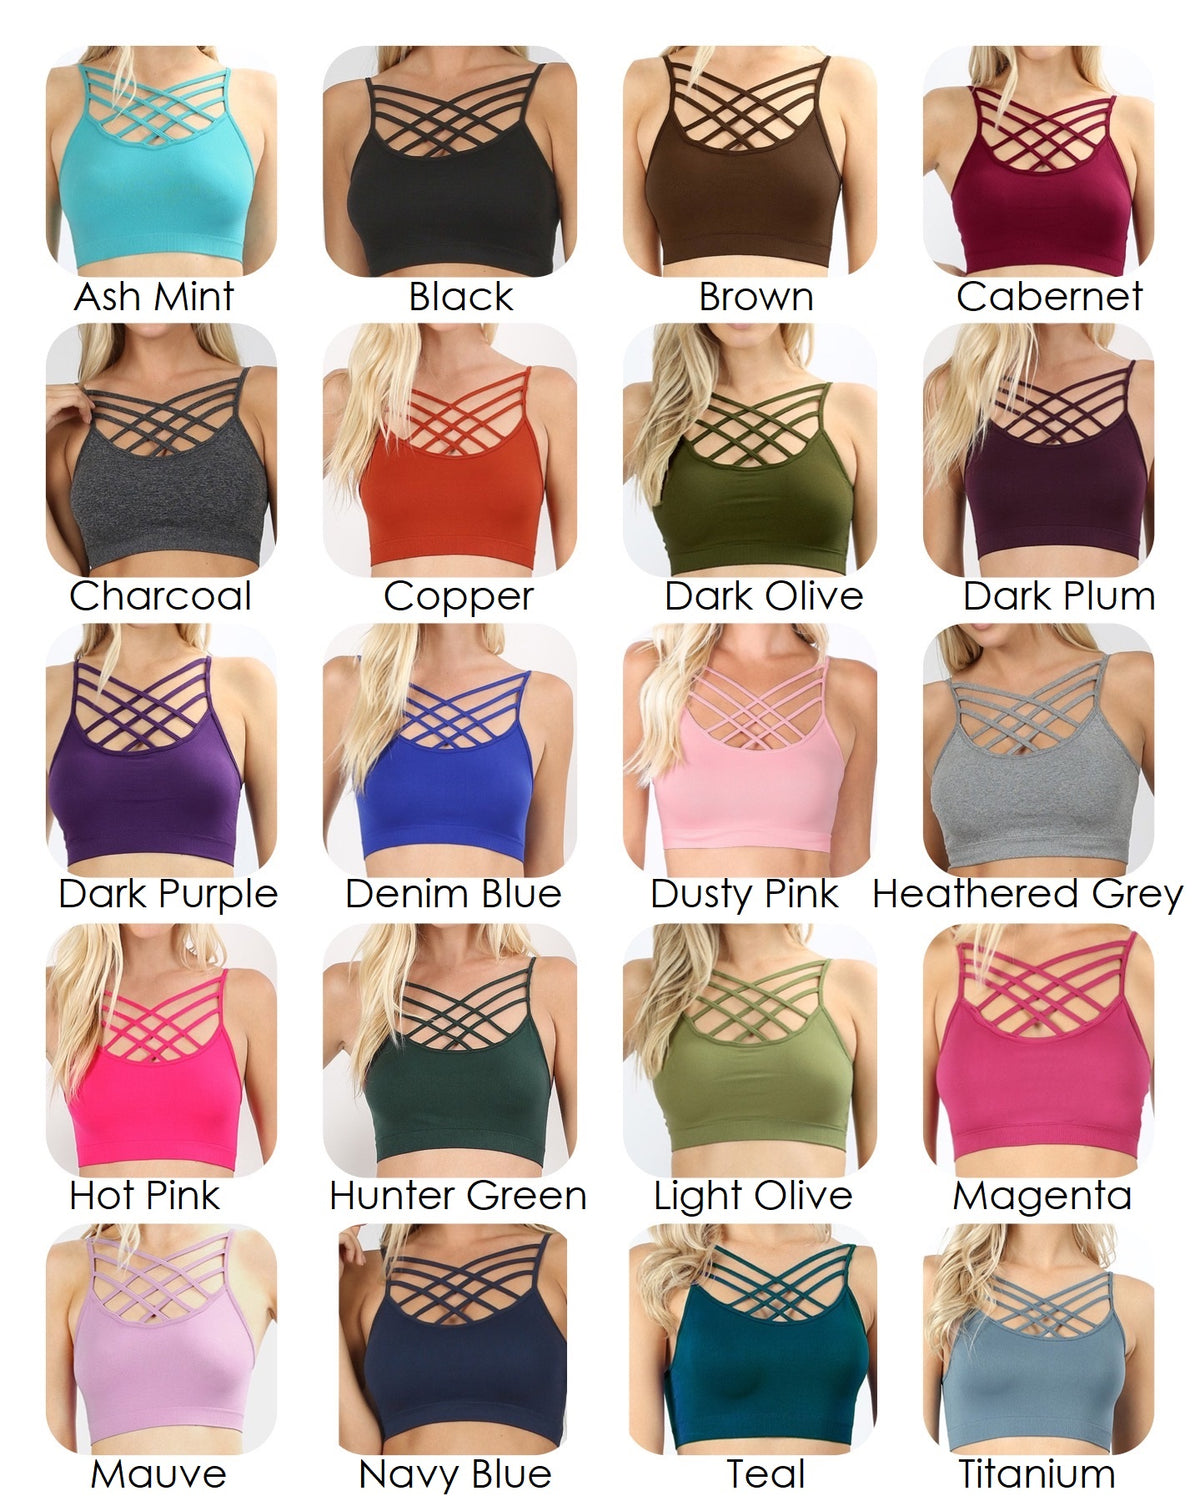 Seamless Triple Criss-Cross Short Crop Bralette: Soft and Stretchy, Solid Colors, Non-Padded, All Sizes Regular & Plus, Small - 3XL, Bra, Bralette, Criss-Cross, Strappy